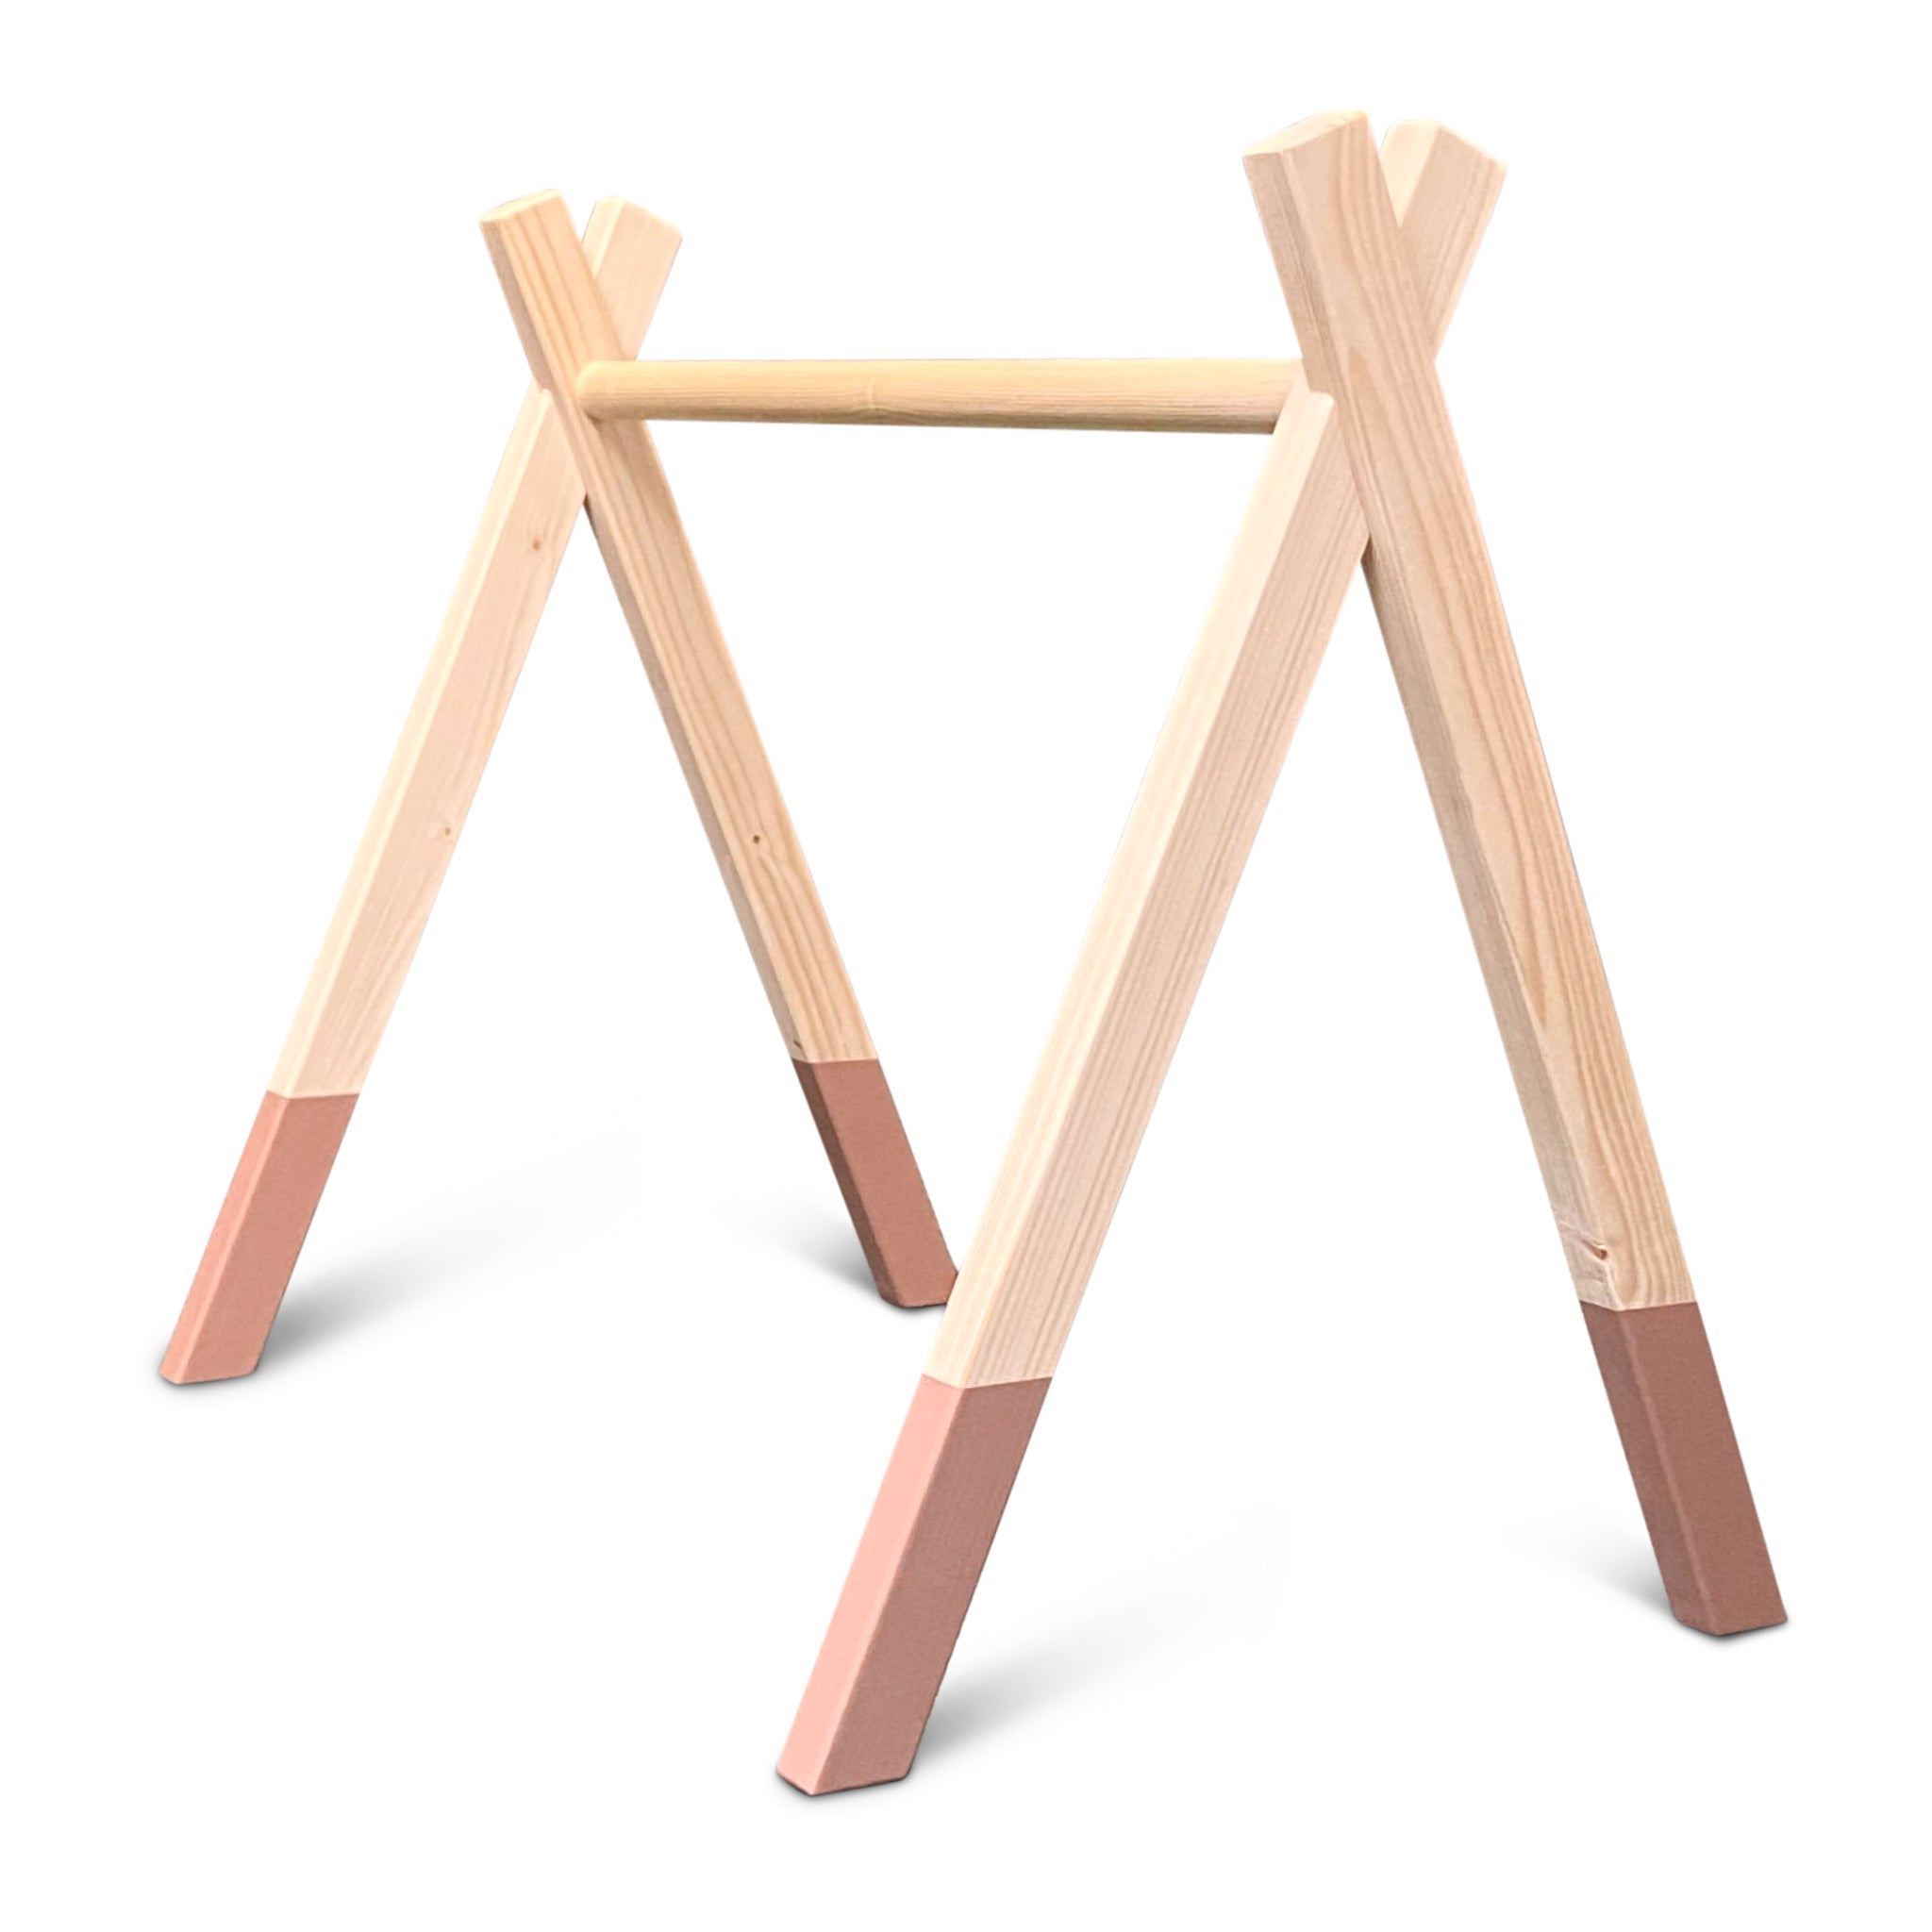 Wooden baby gym, Terra pink, without hangers (sold separately) - toddie.com